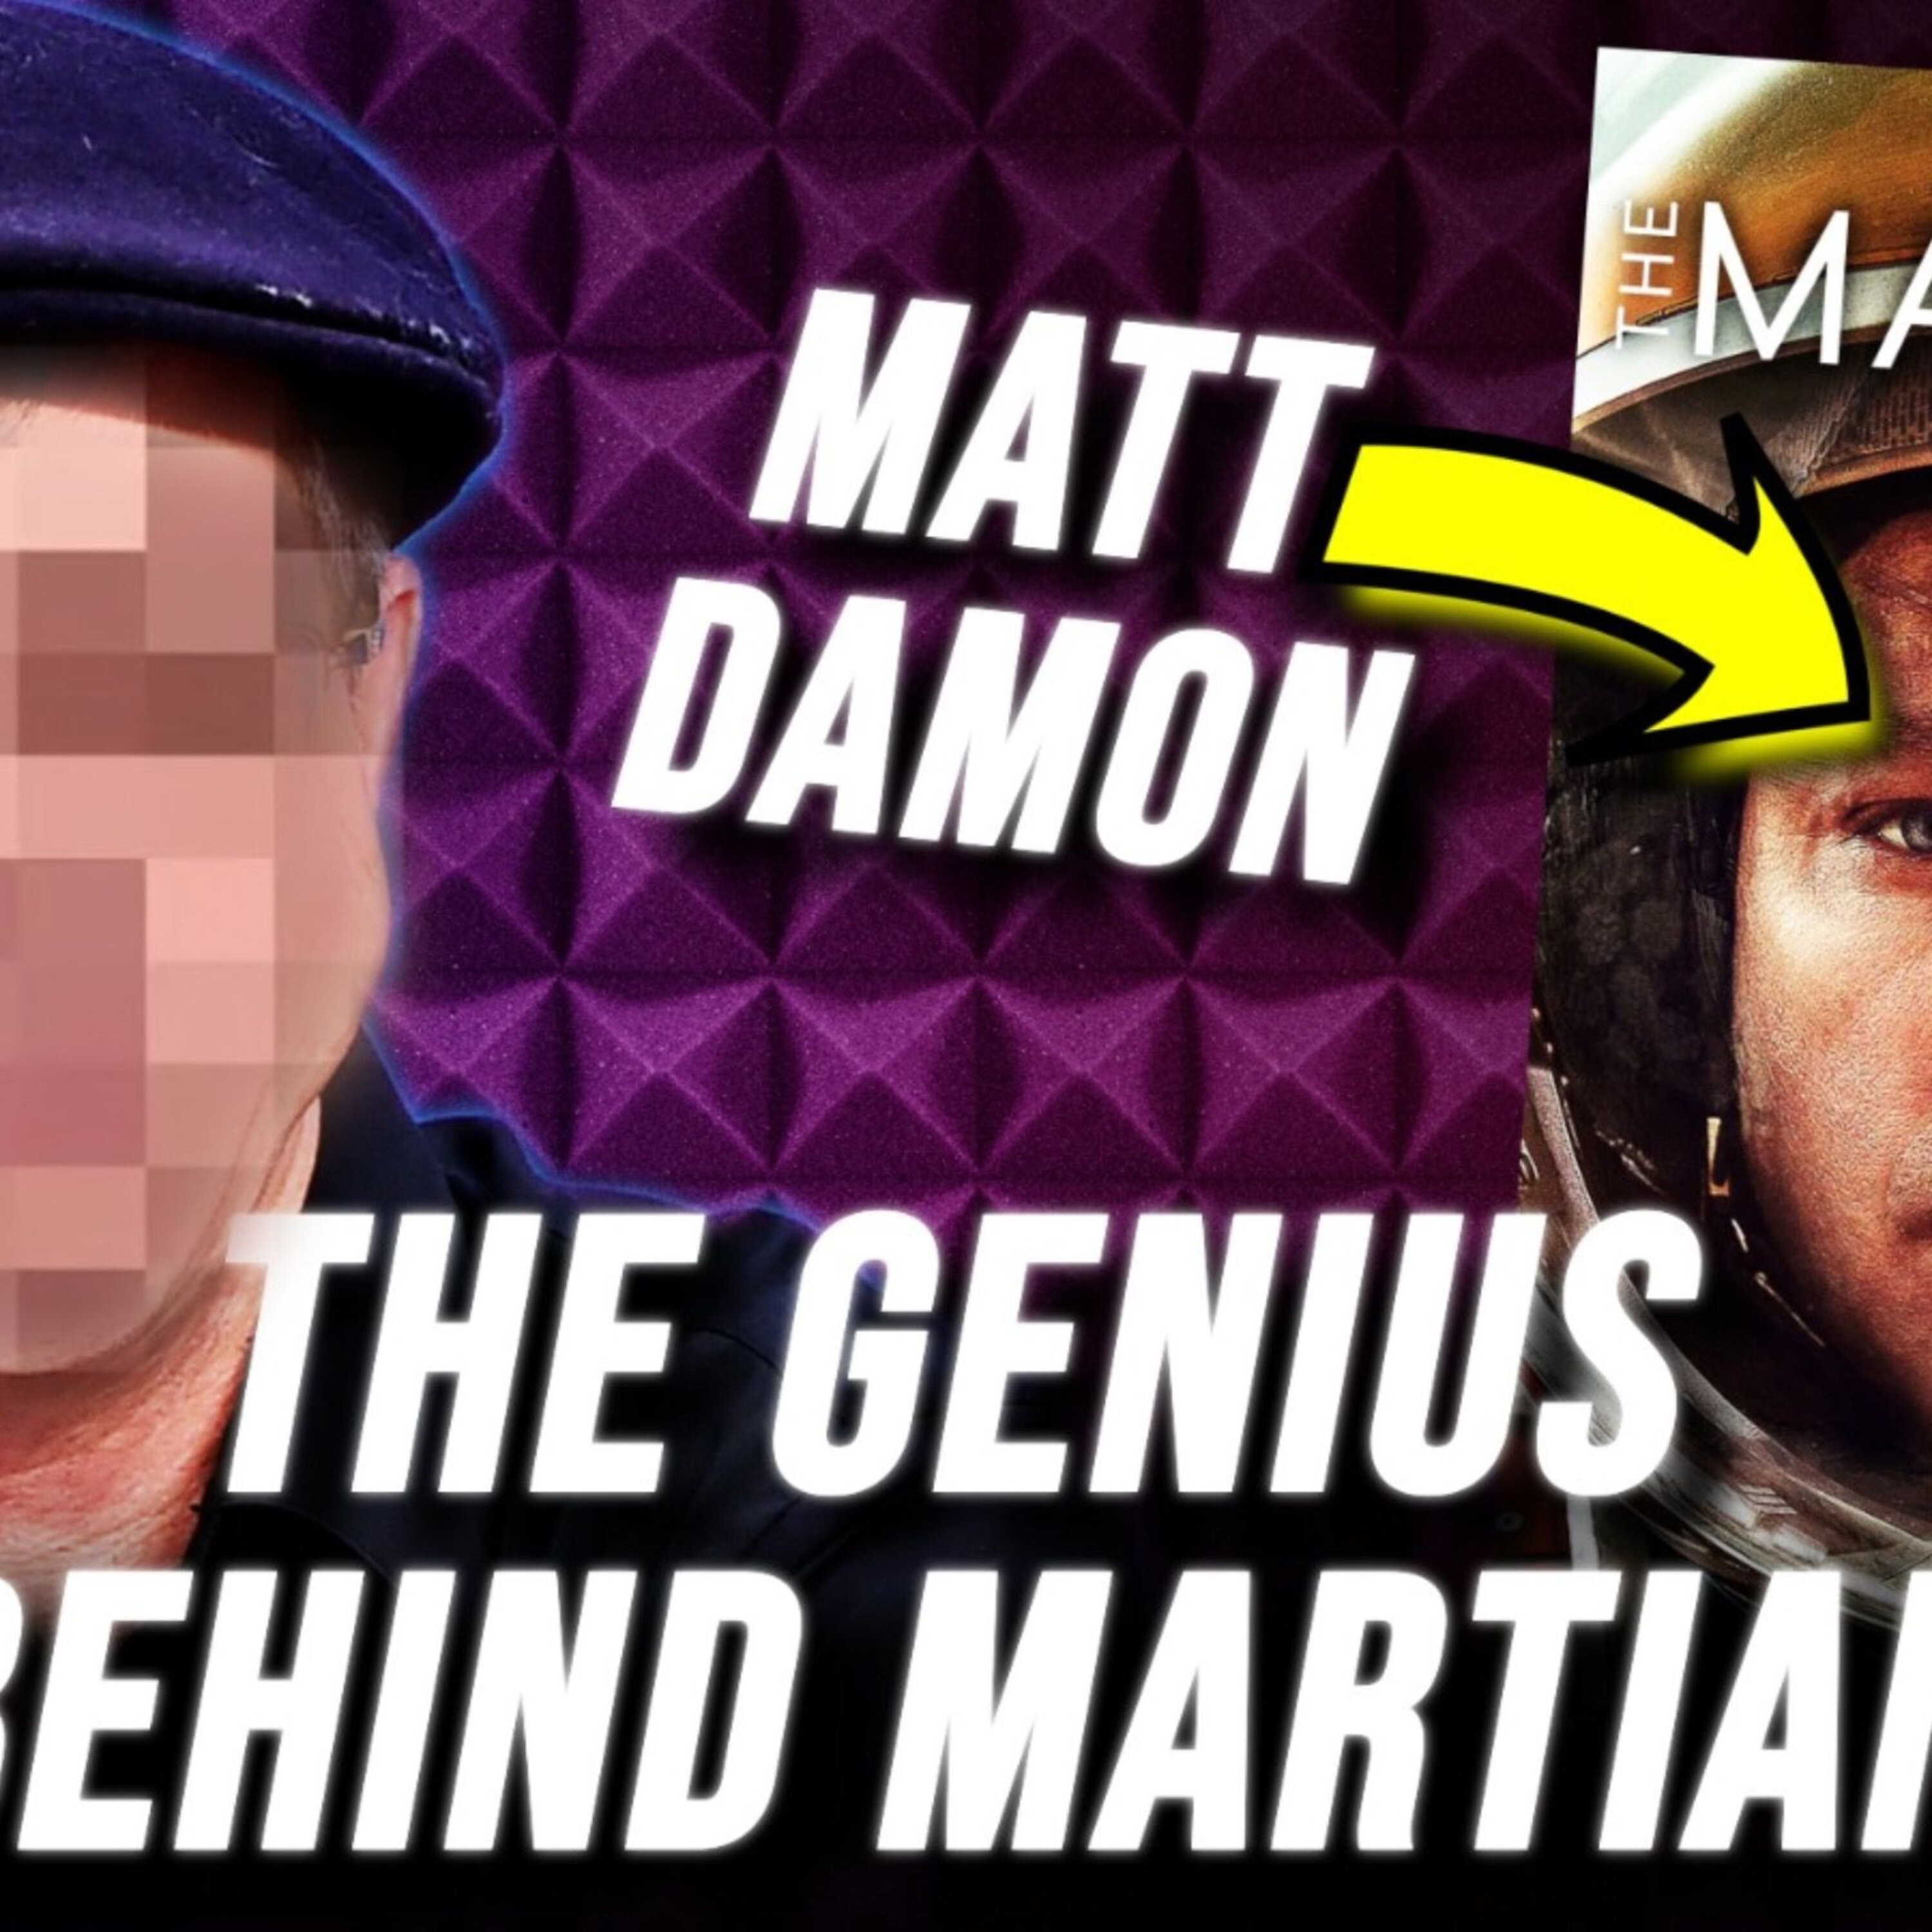 EP 30 How Andy Weir went from being an unknown sci-fi writer to a Matt Damon starring Hollywood blockbuster